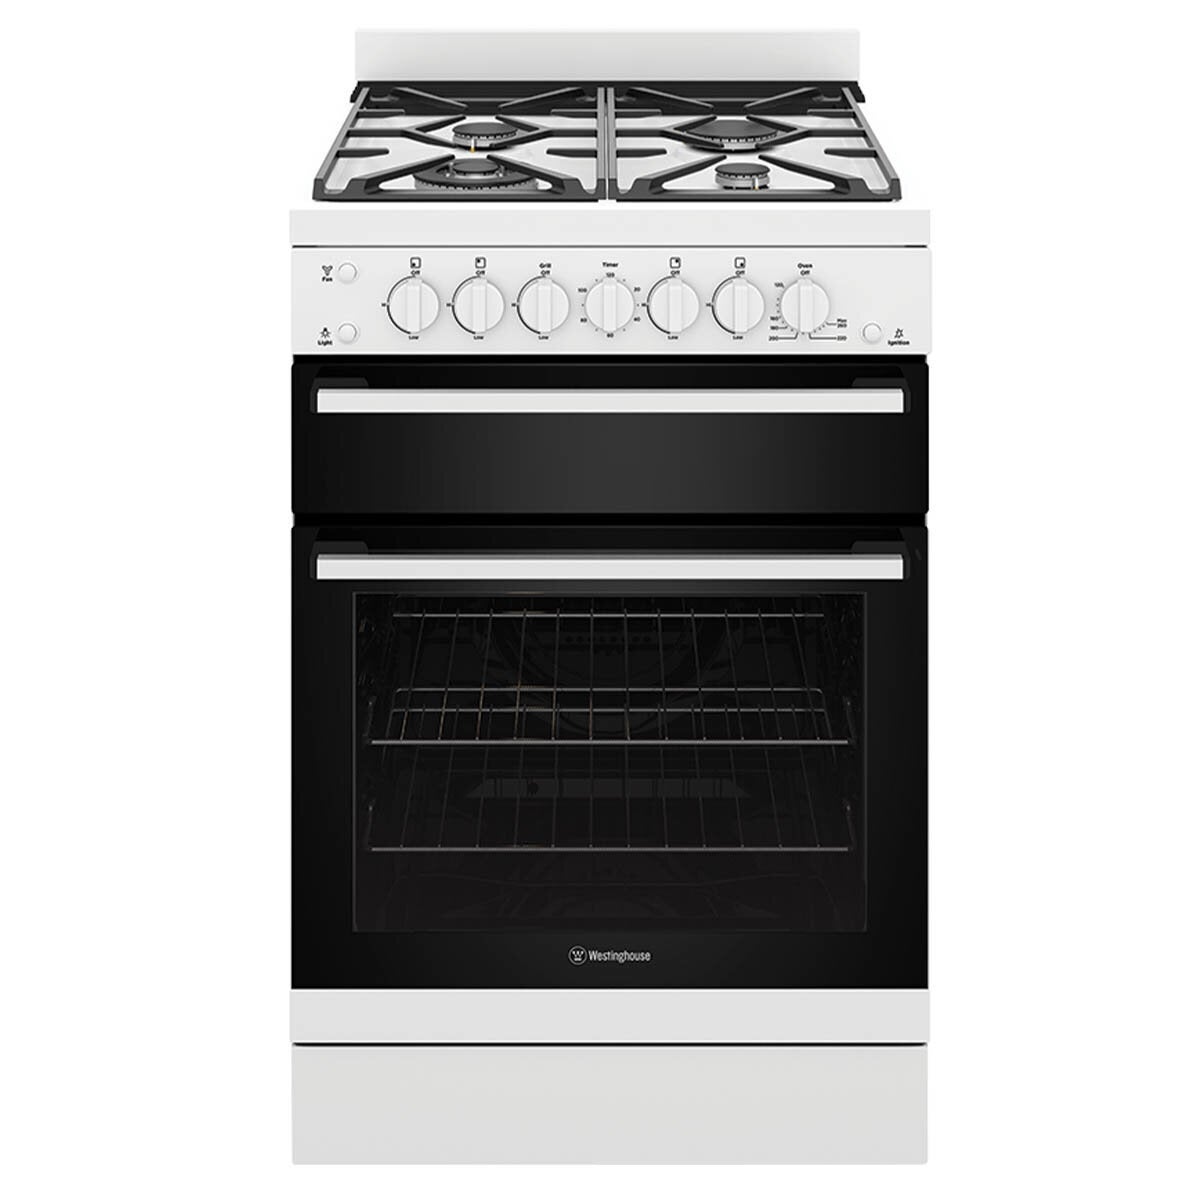 Westinghouse WFG612 Oven